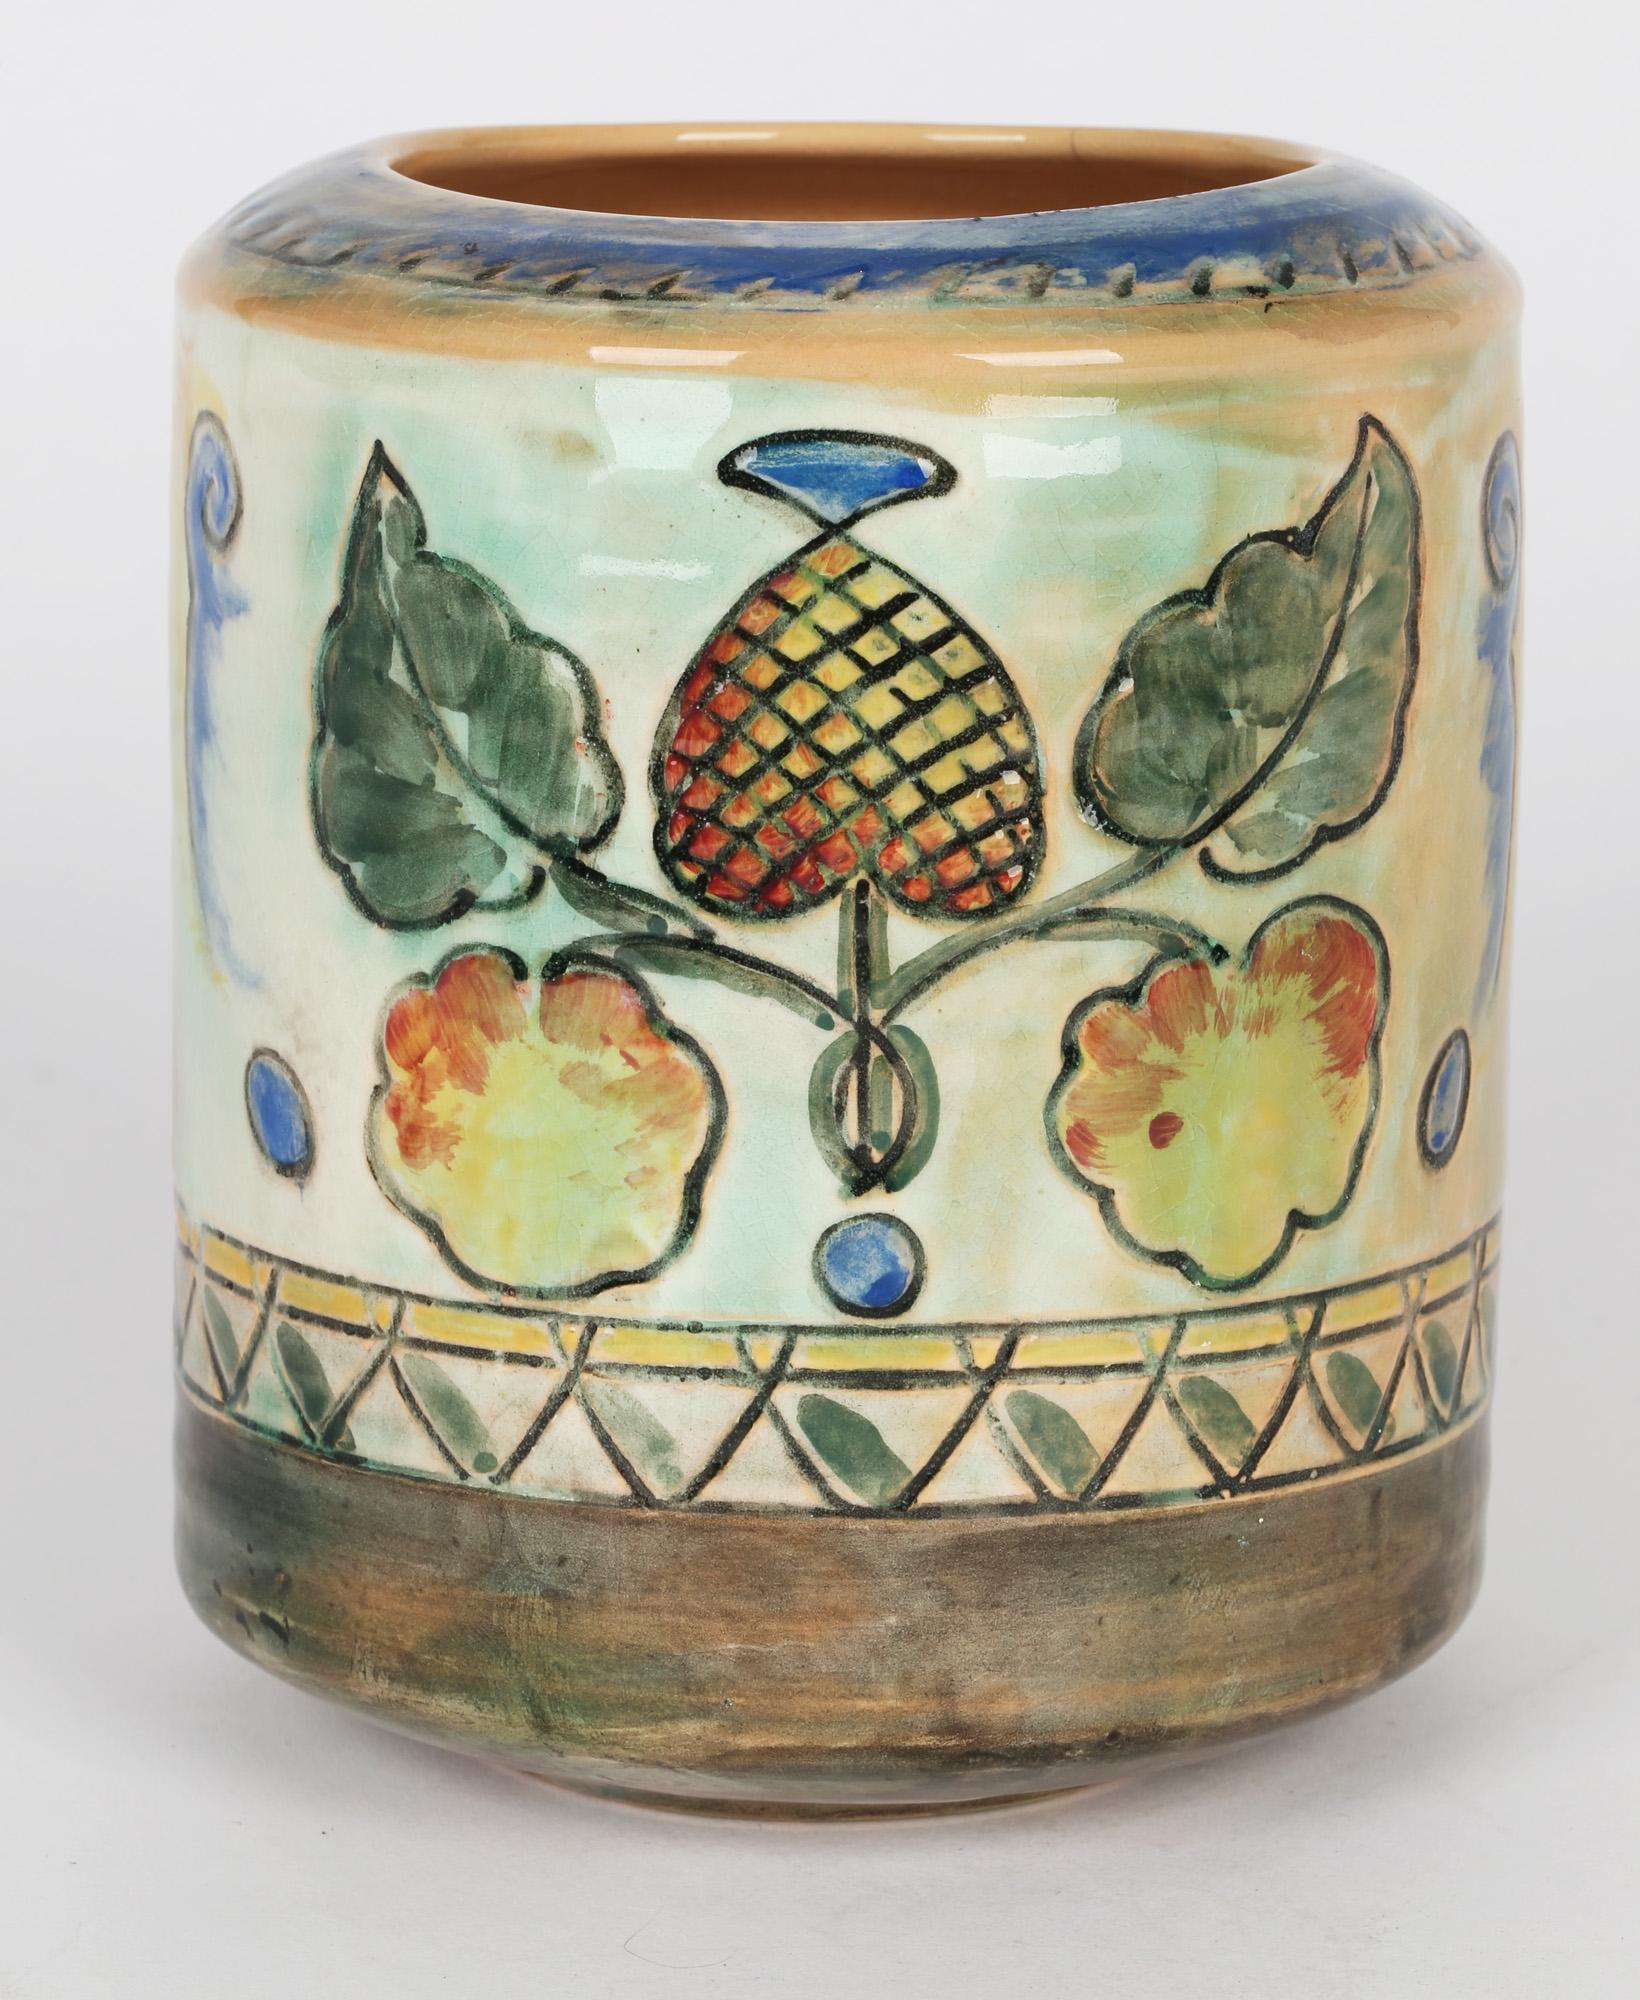 English Frank Brangwyn Royal Doulton Arts and Crafts Leaf and Berry Art Pottery Vase For Sale